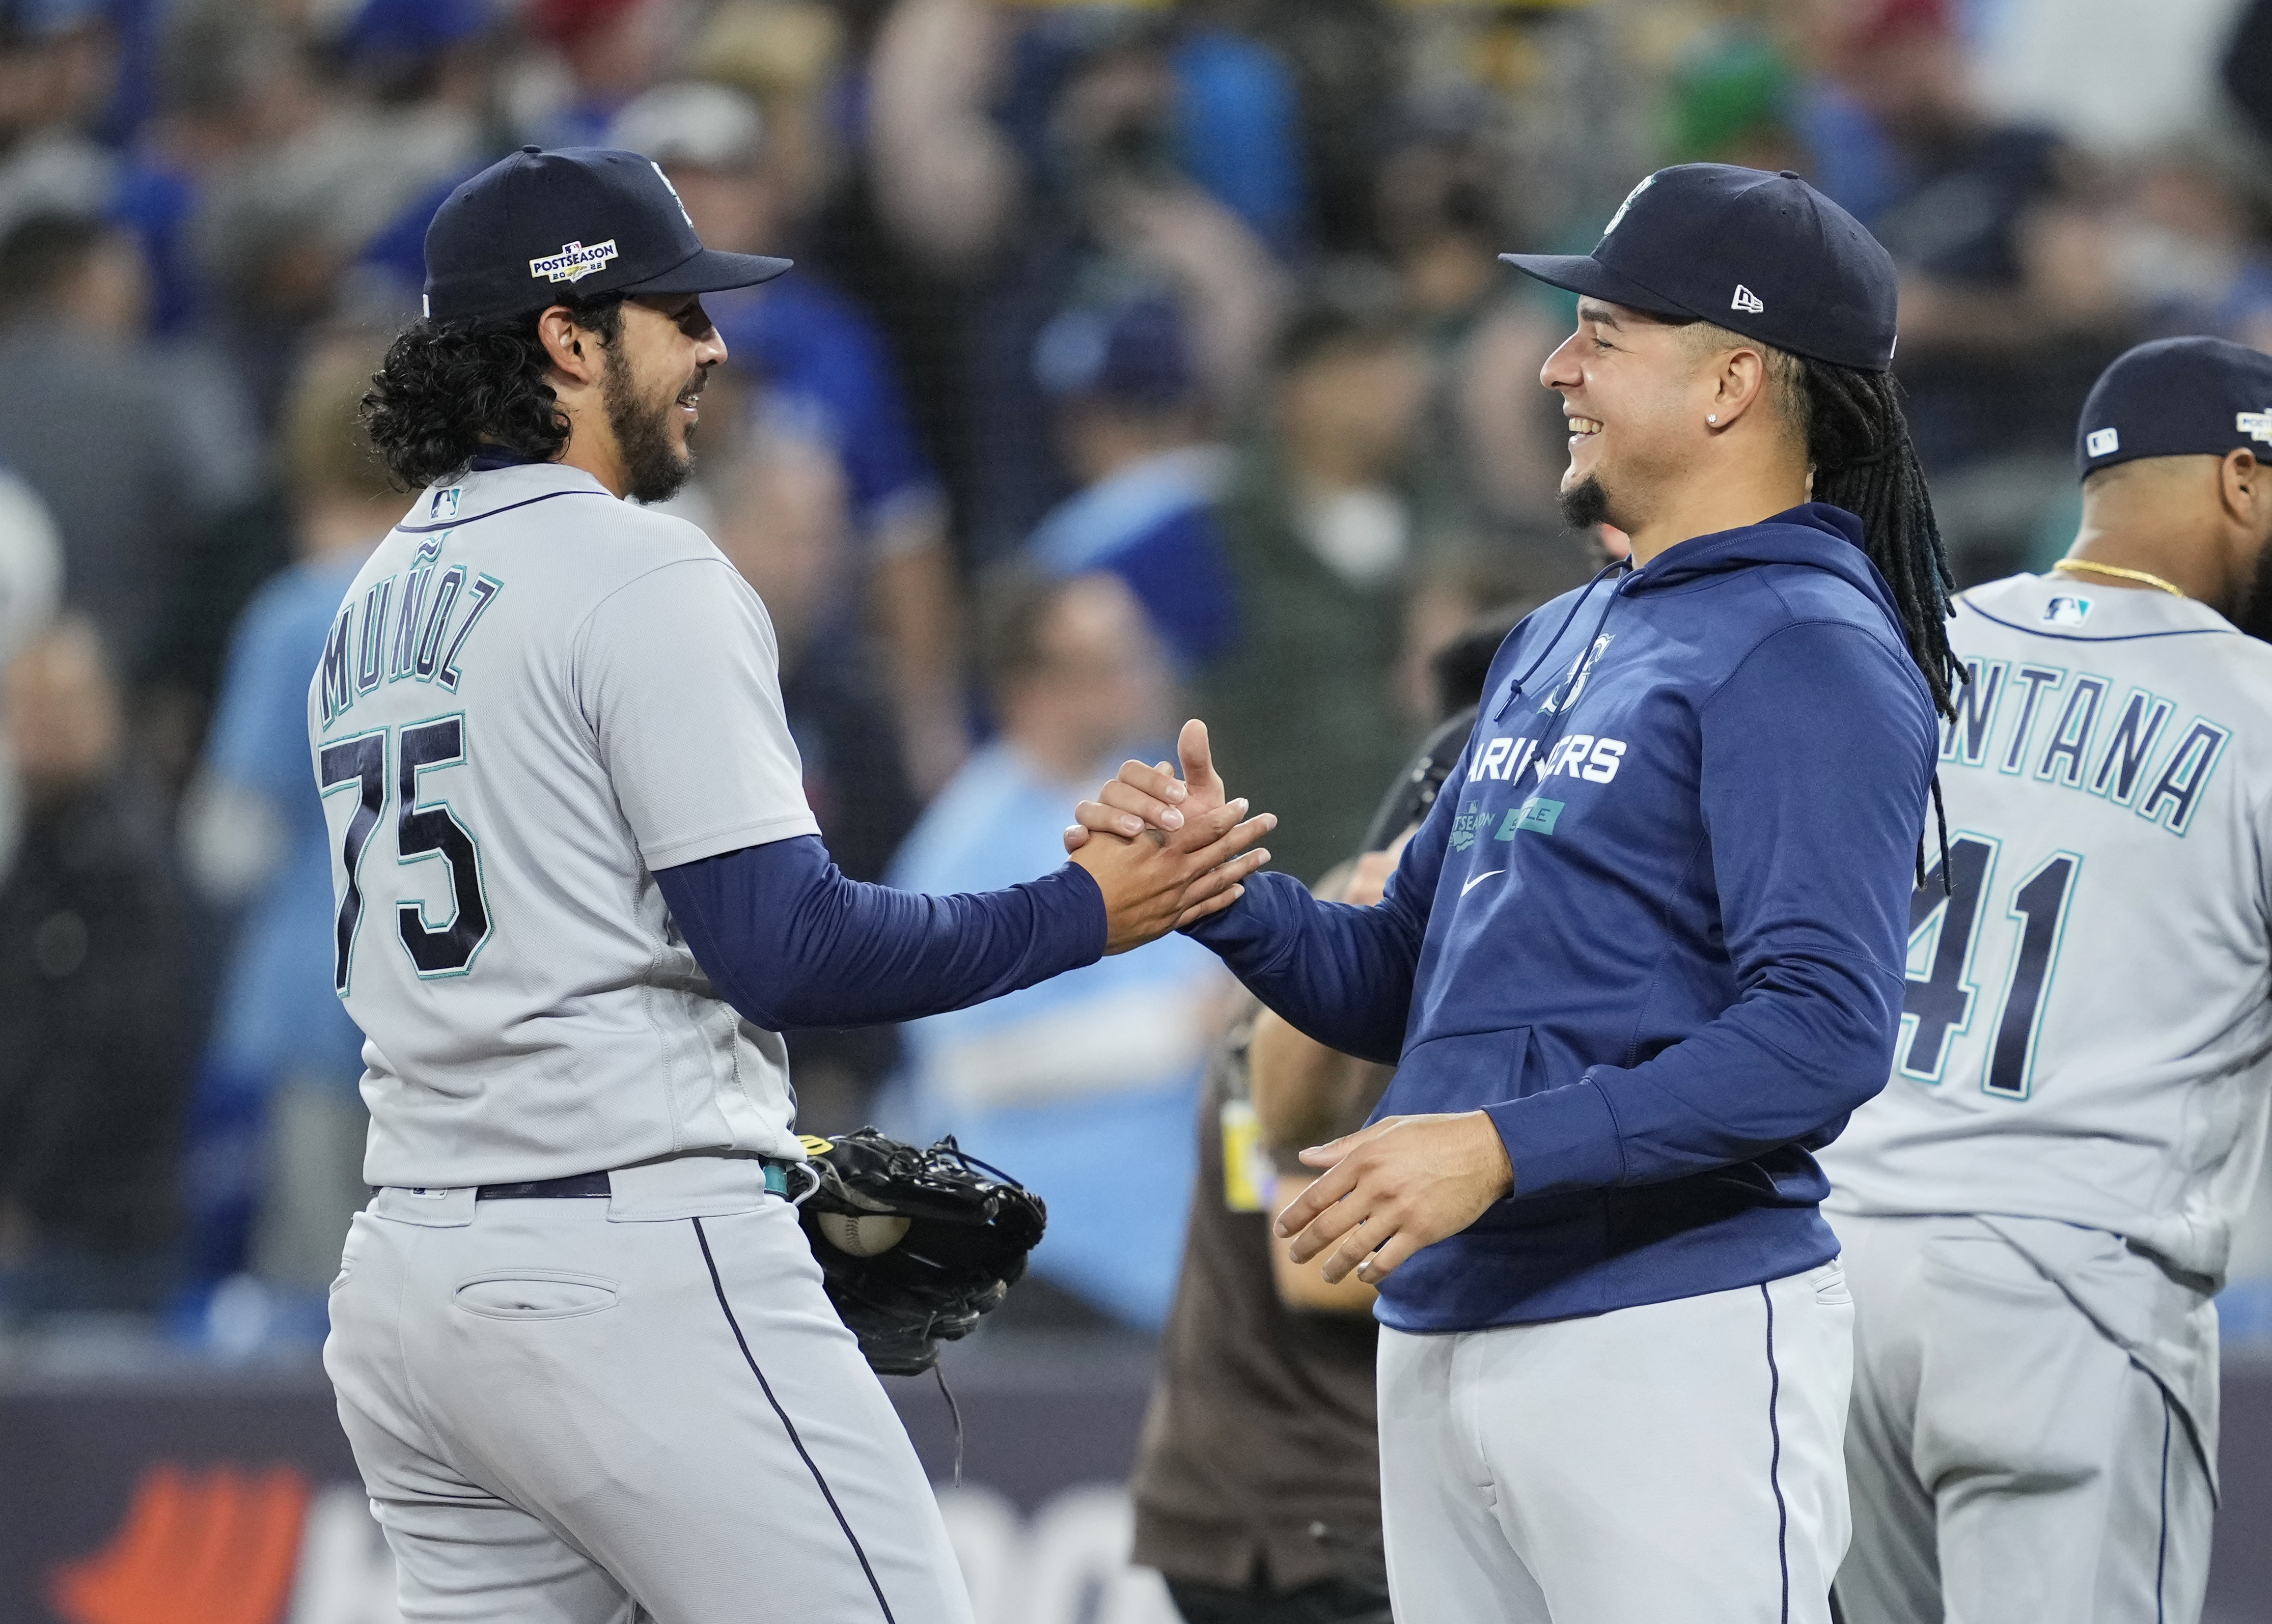 Mariners' Luis Castillo lined up to face Yankees again next week